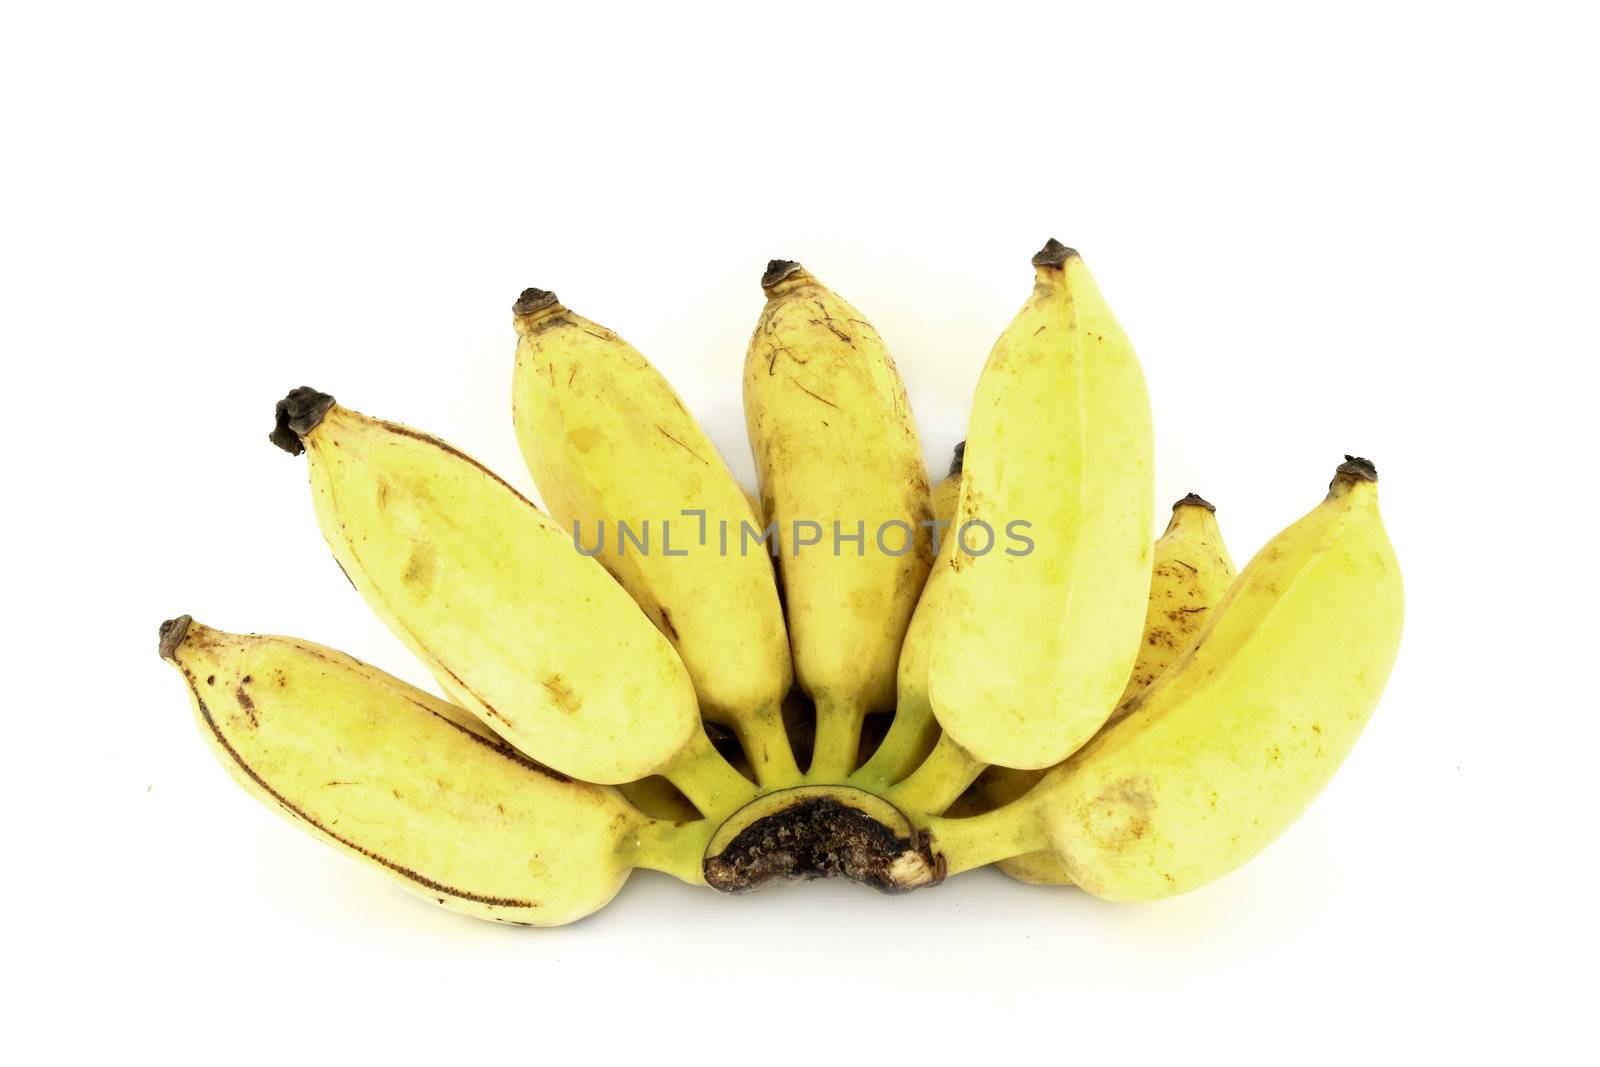 bunch of over ripe bananas on white background by geargodz